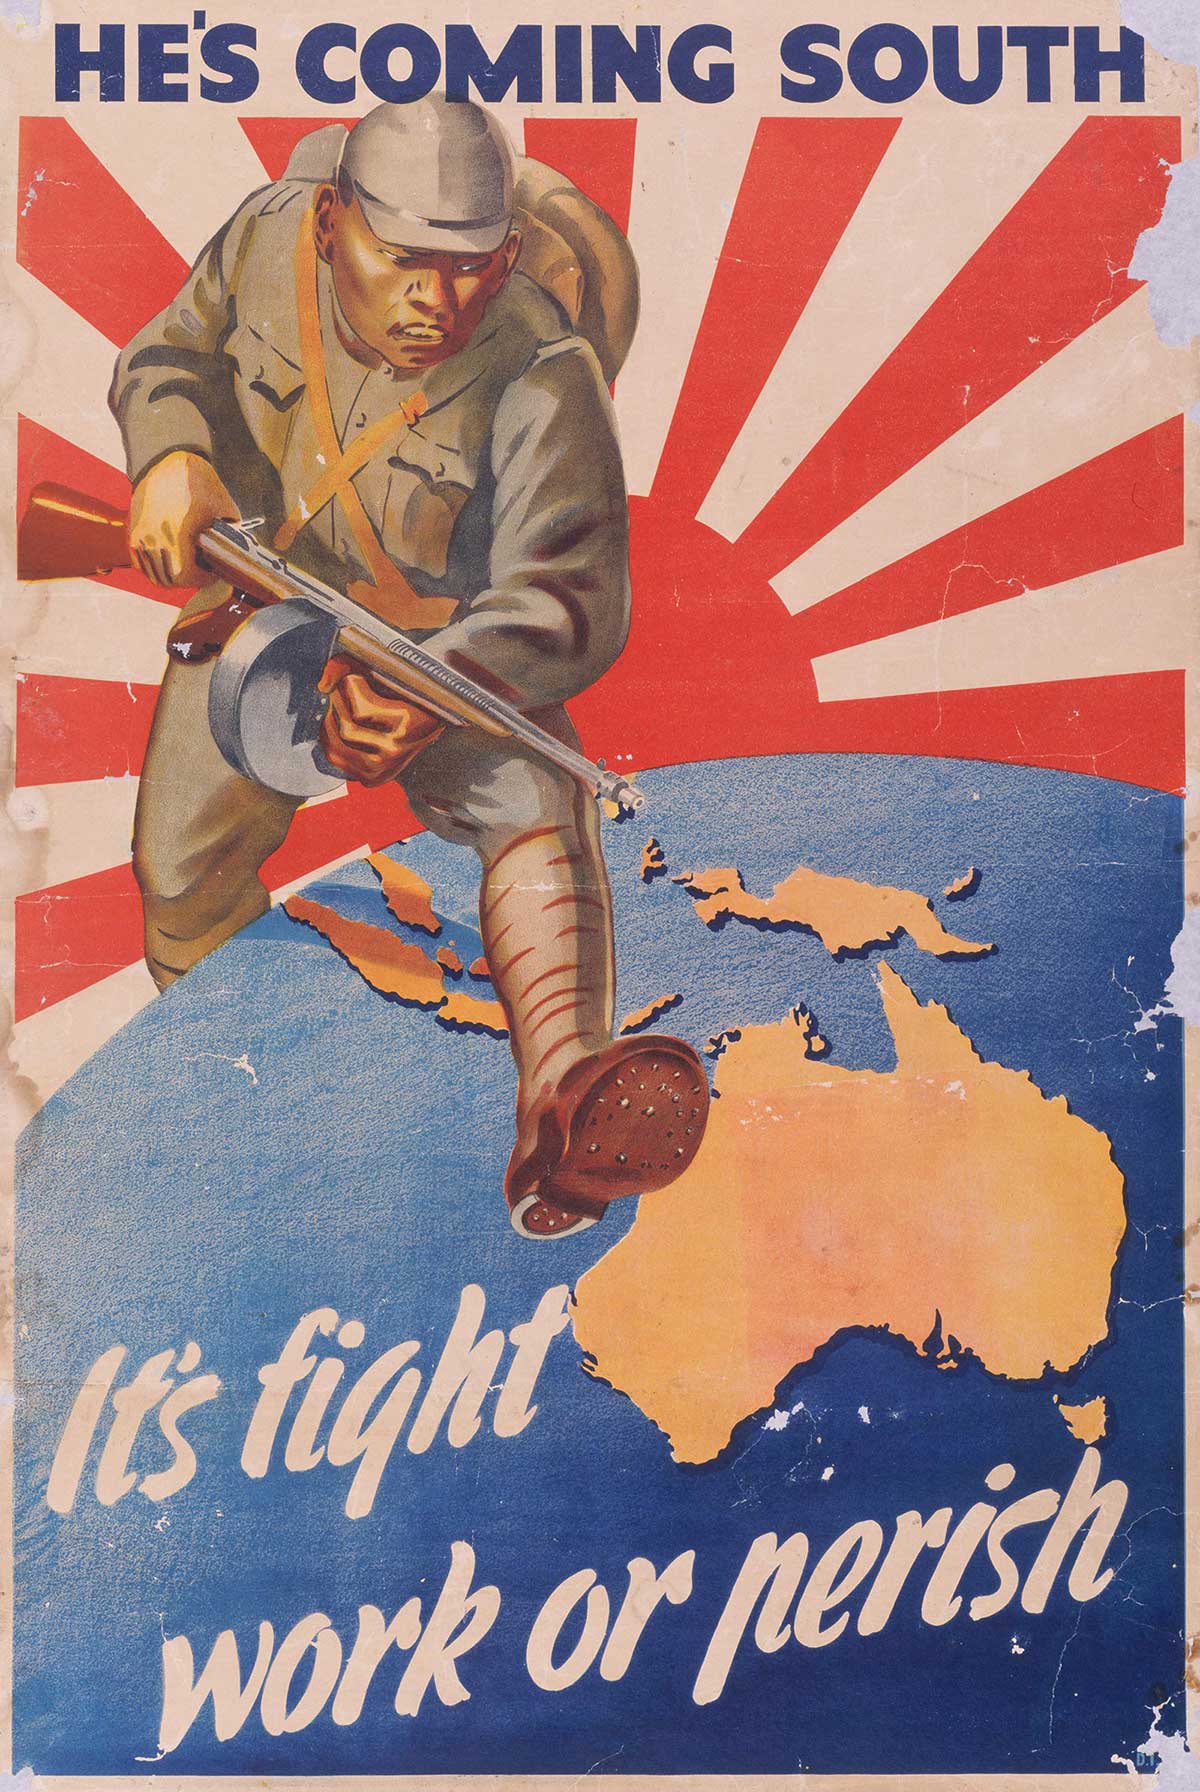 Colour poster featuring a soldier carrying a weapon and stepping over an image of Earth with a view Australia. The text at the top reads 'HE’S COMING SOUTH'.